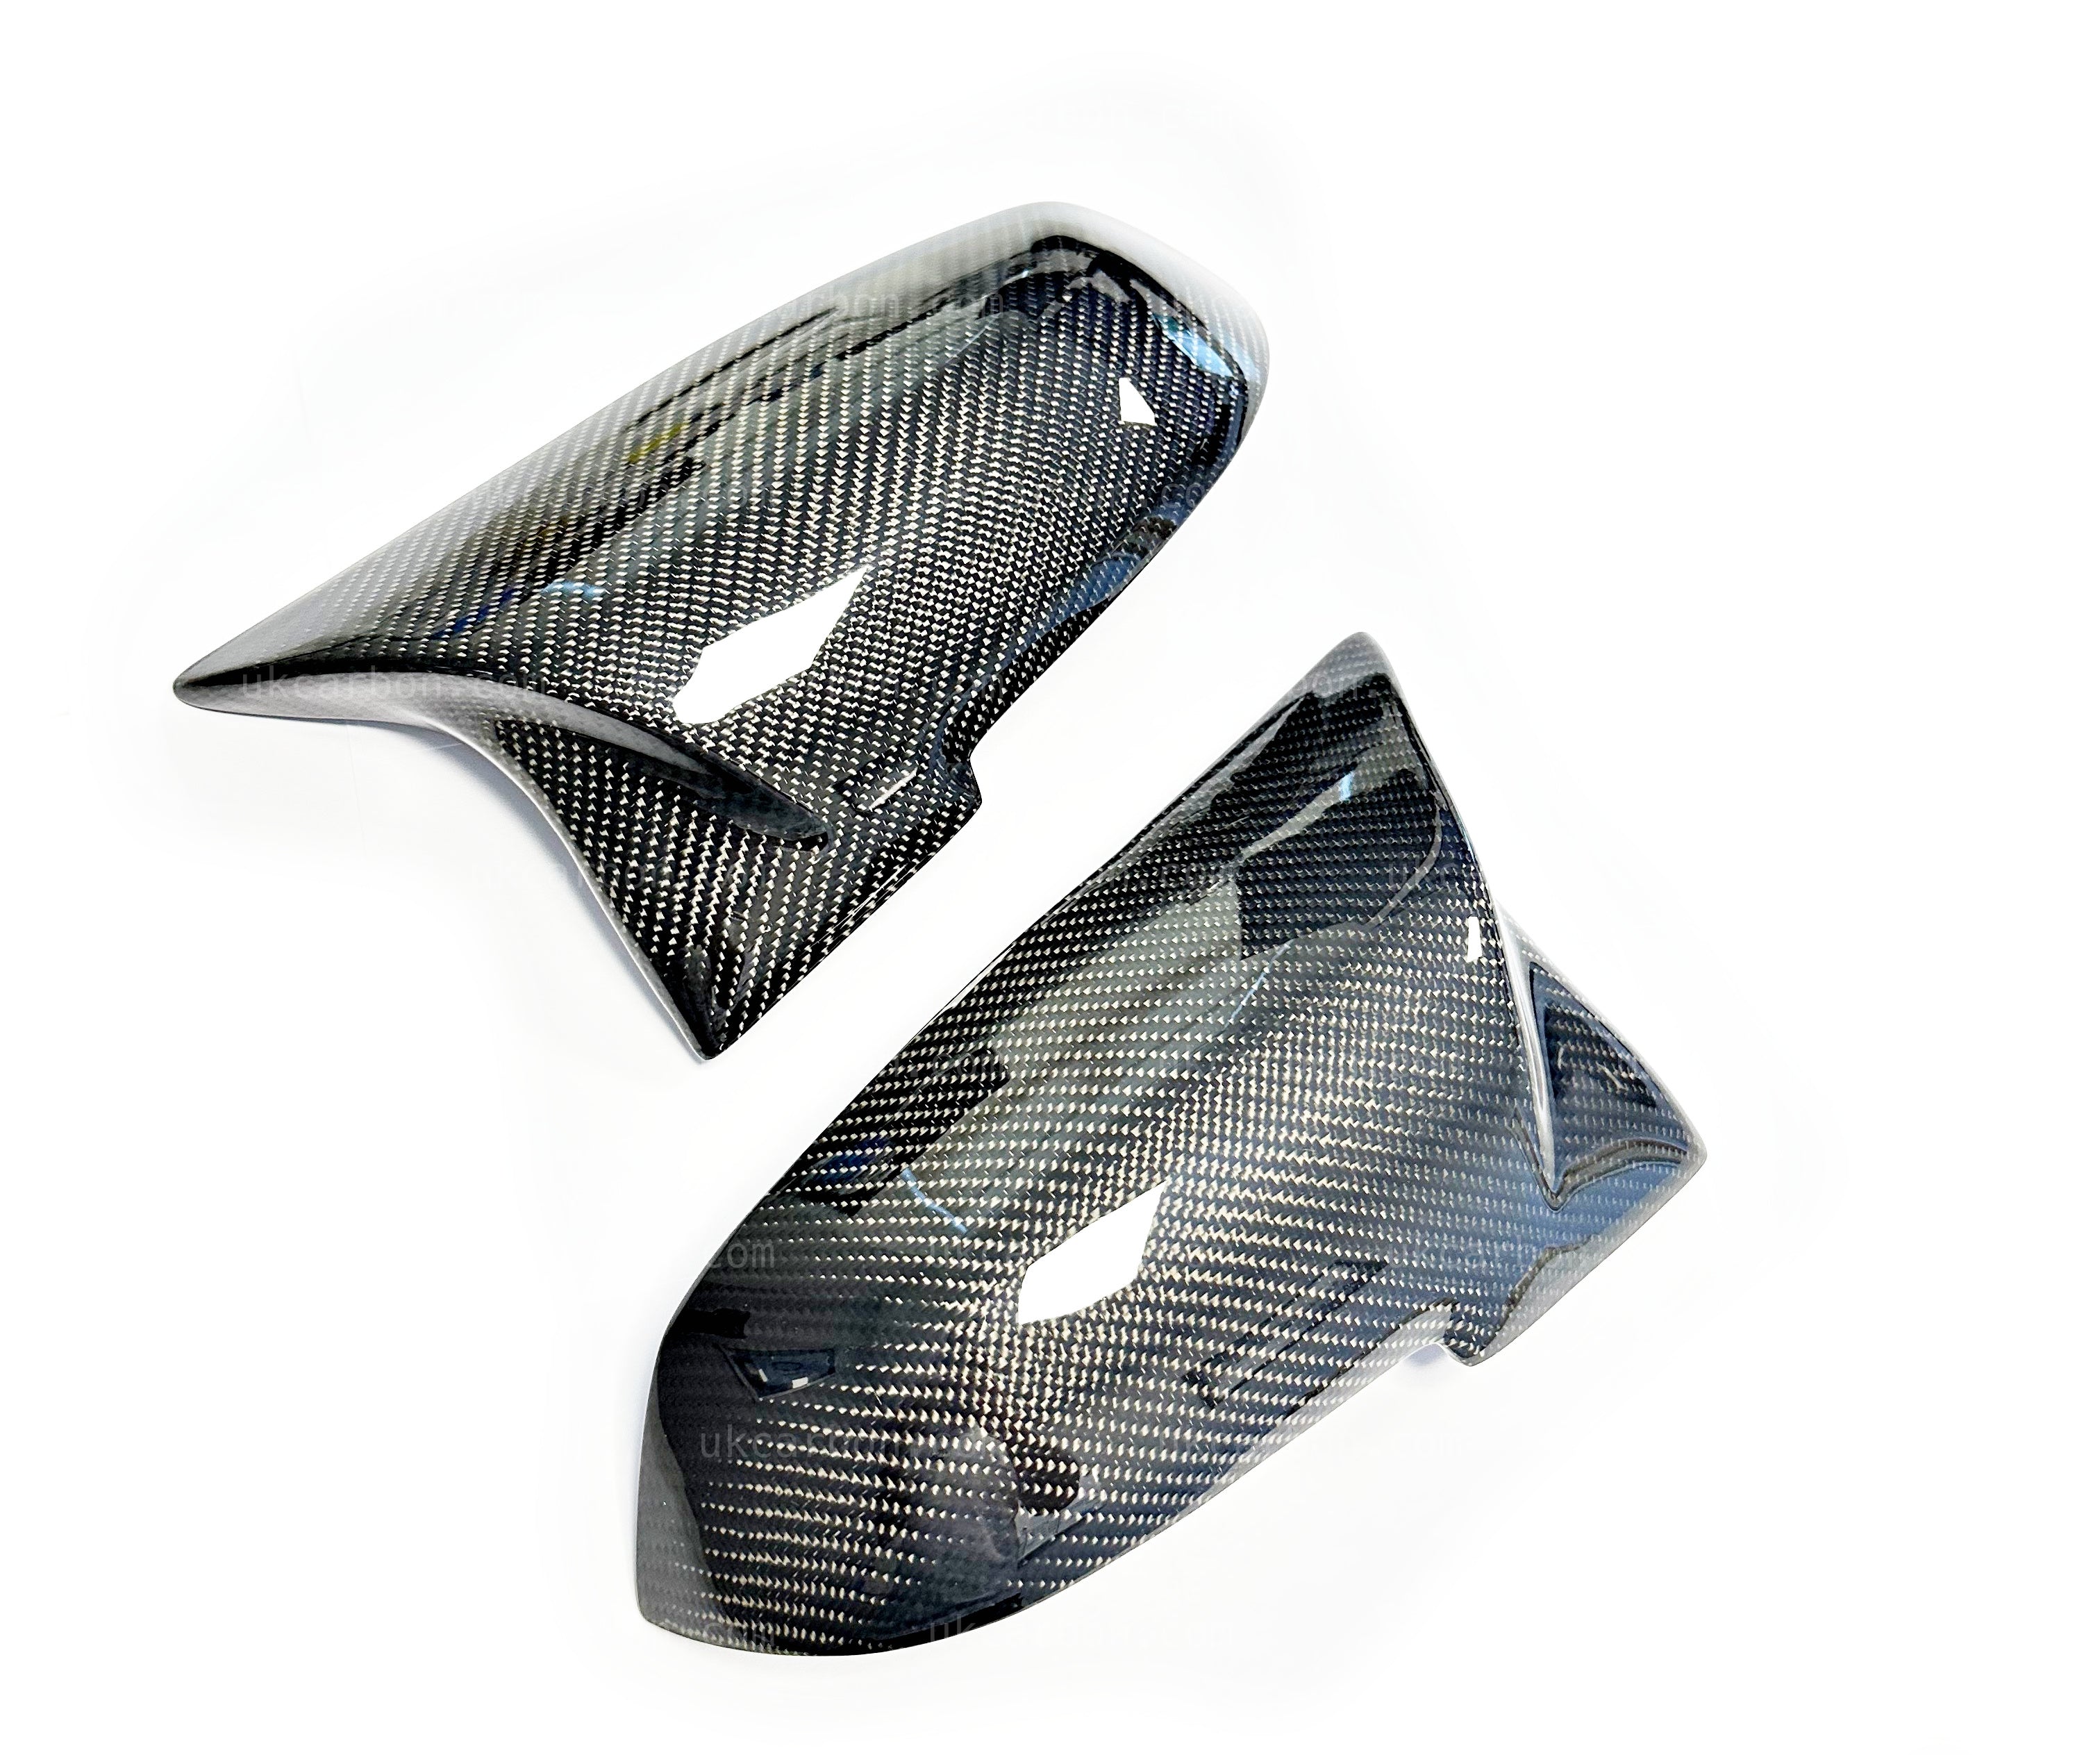 BMW 3 Series Carbon M Style Wing Mirror Cover M Performance F30 F31 by UKCarbon